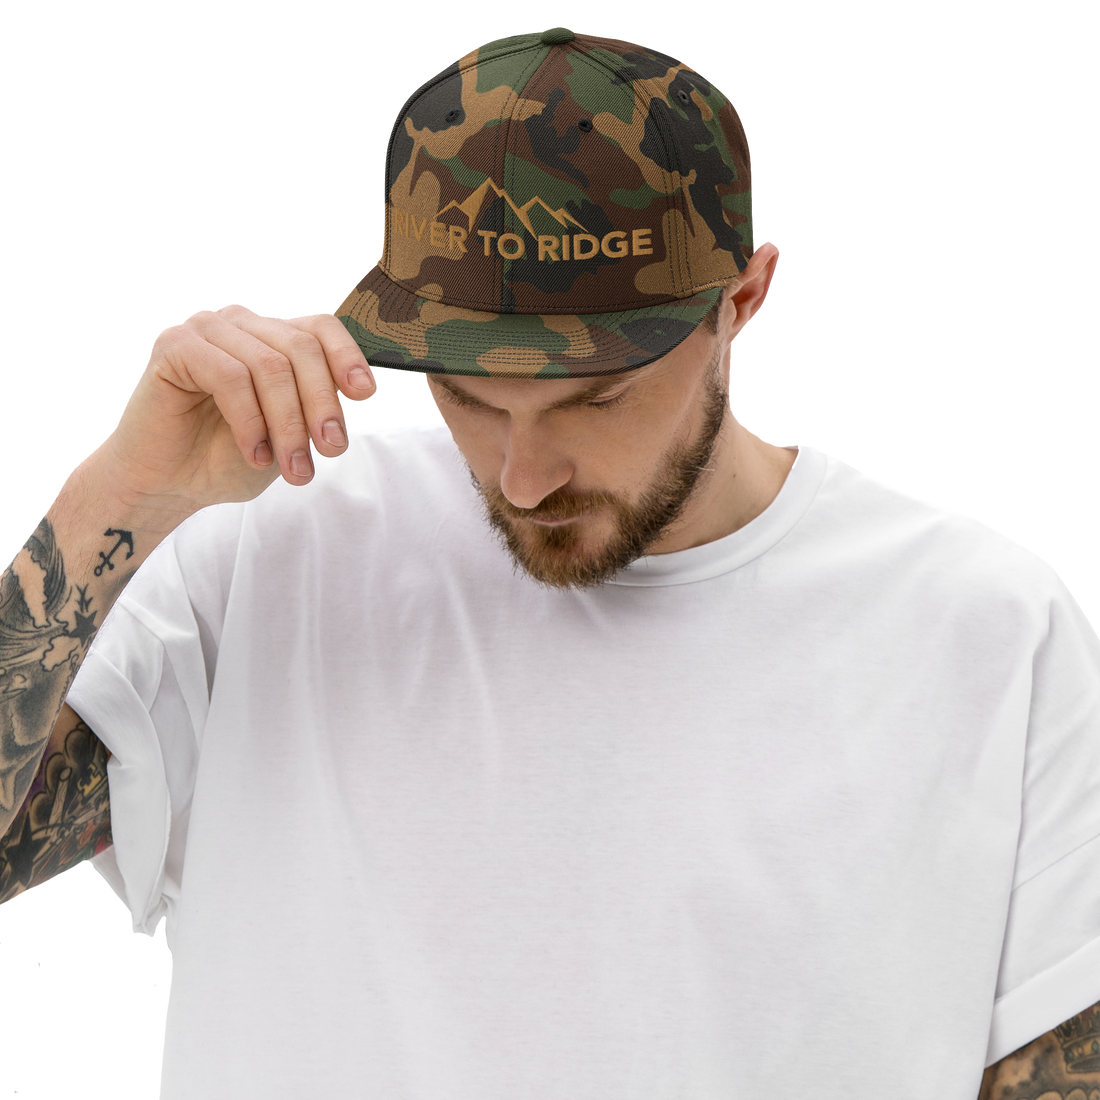  man with arm sleeve tattoos and white t shirt wearing a River to Ridge Logo Brand Camo Snapback hat with the mountain logo stitched on it